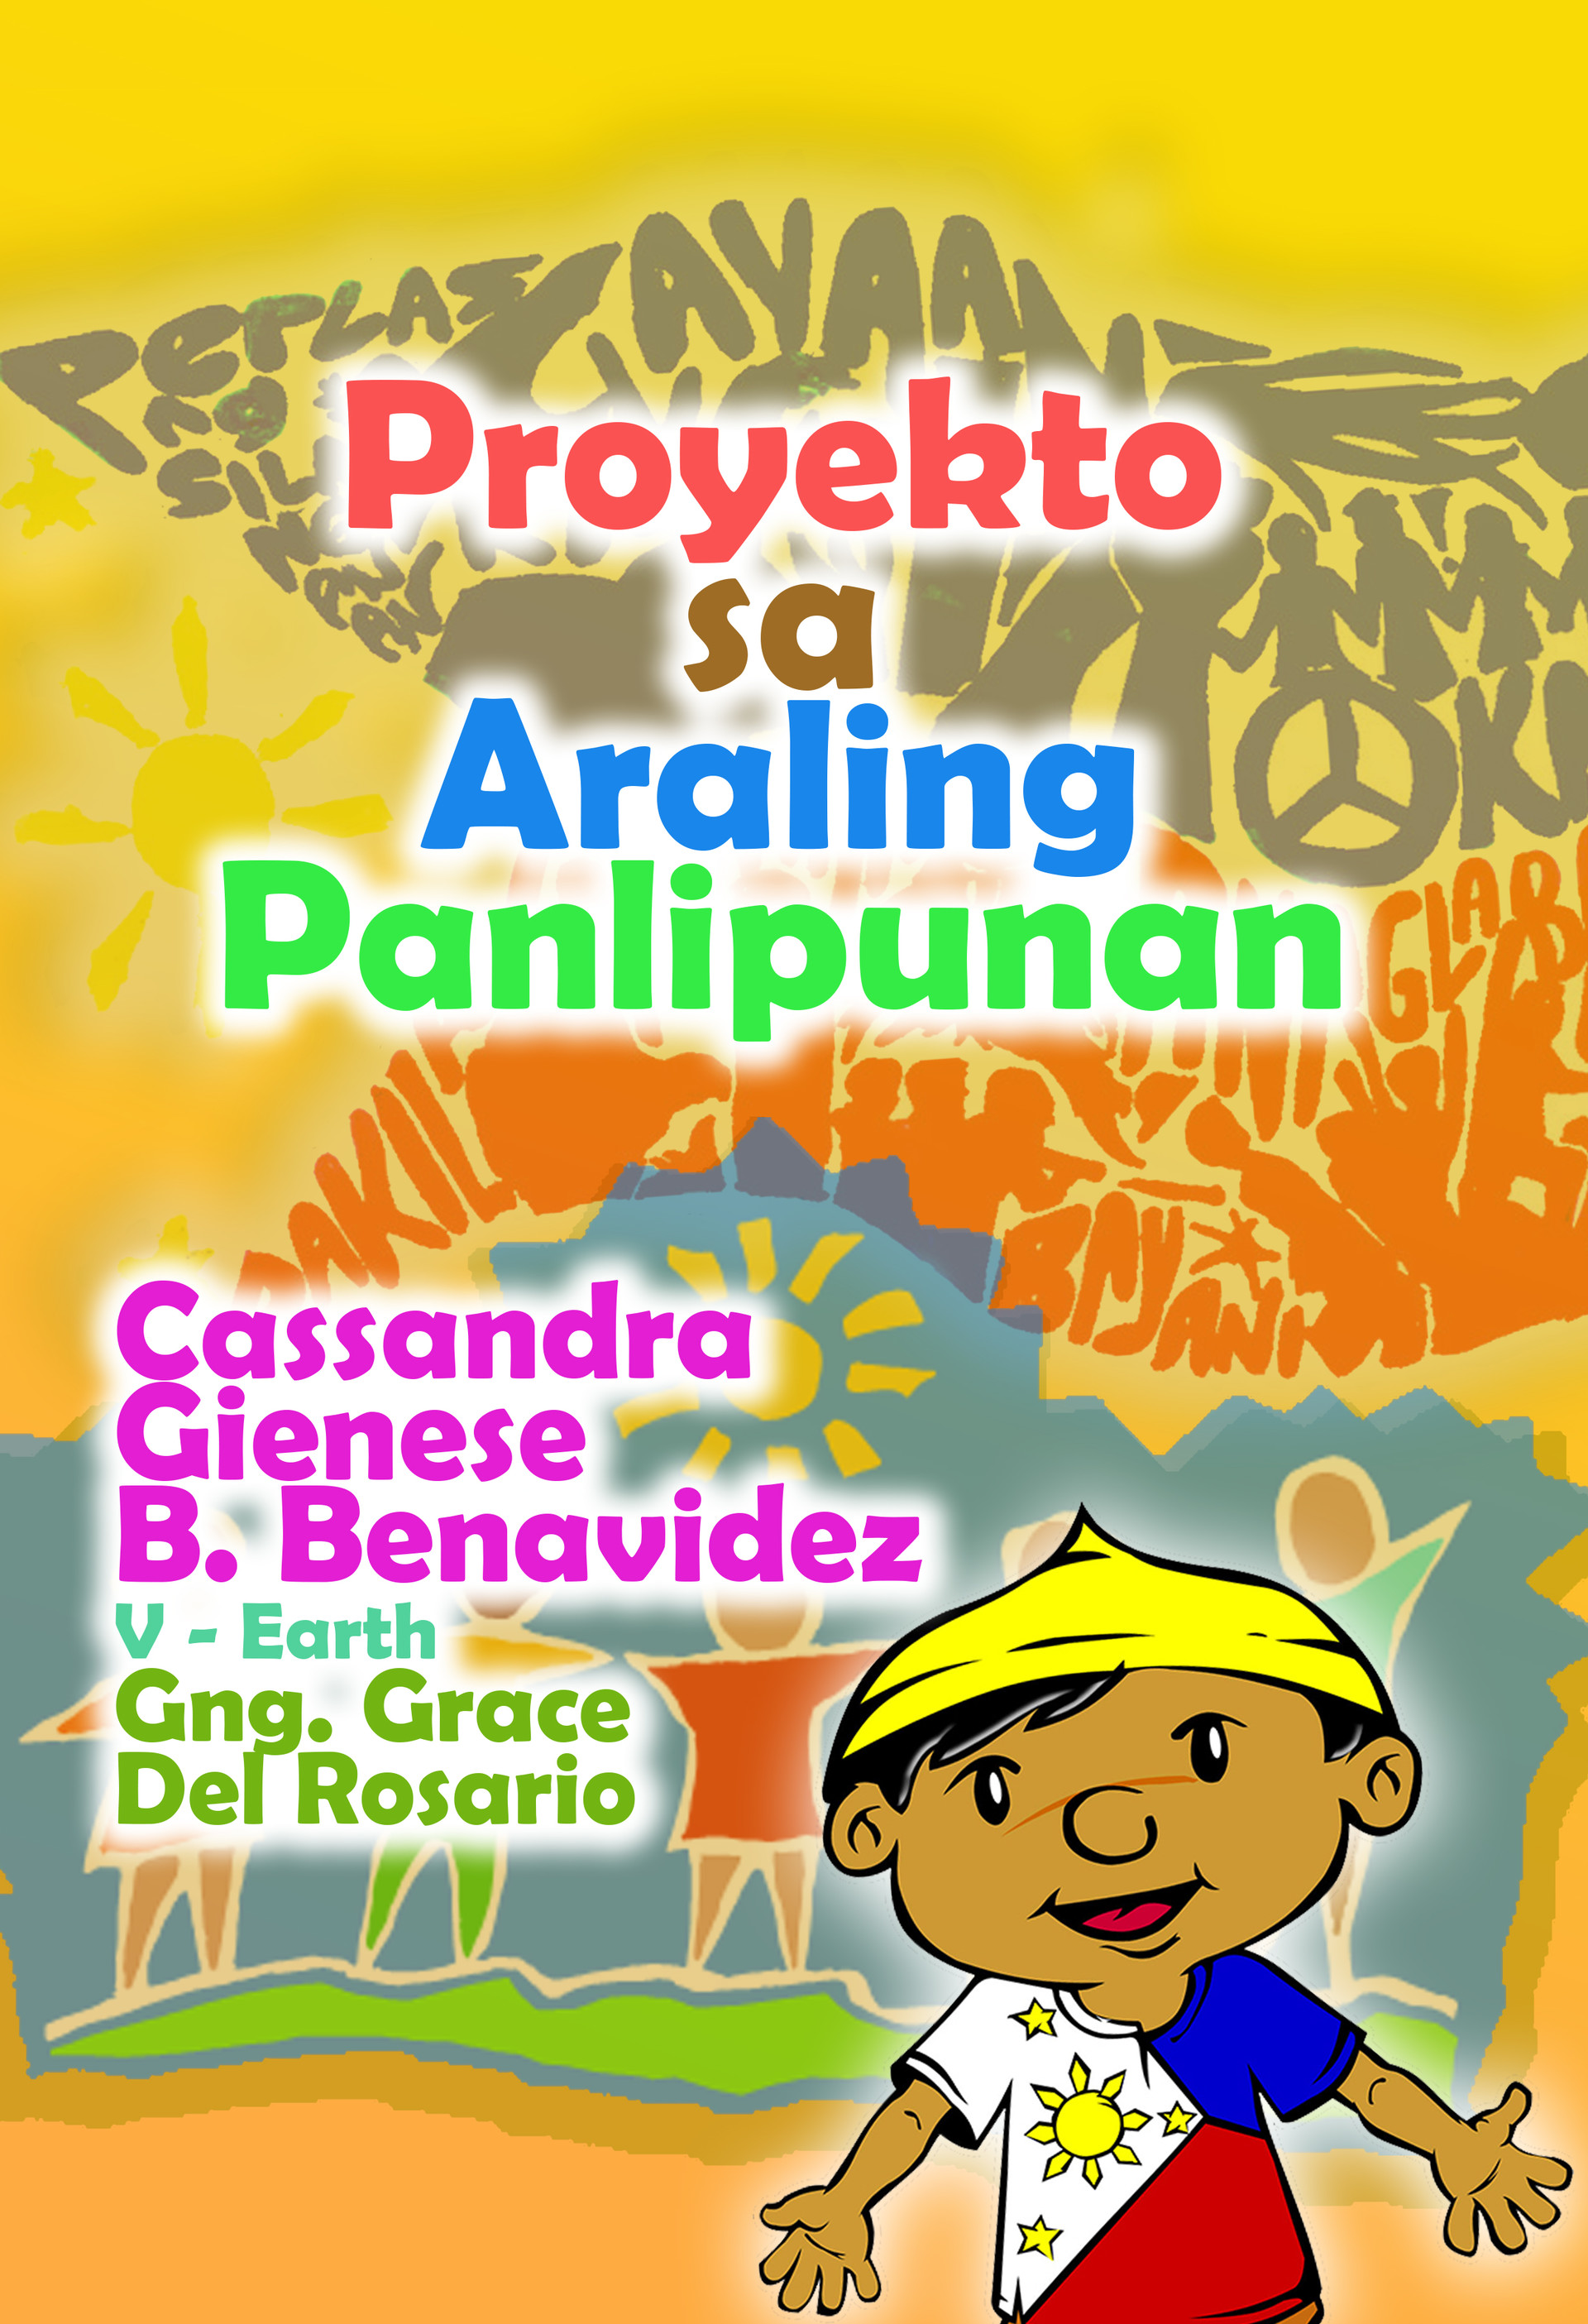 maunlad na pamayanan clipart of children